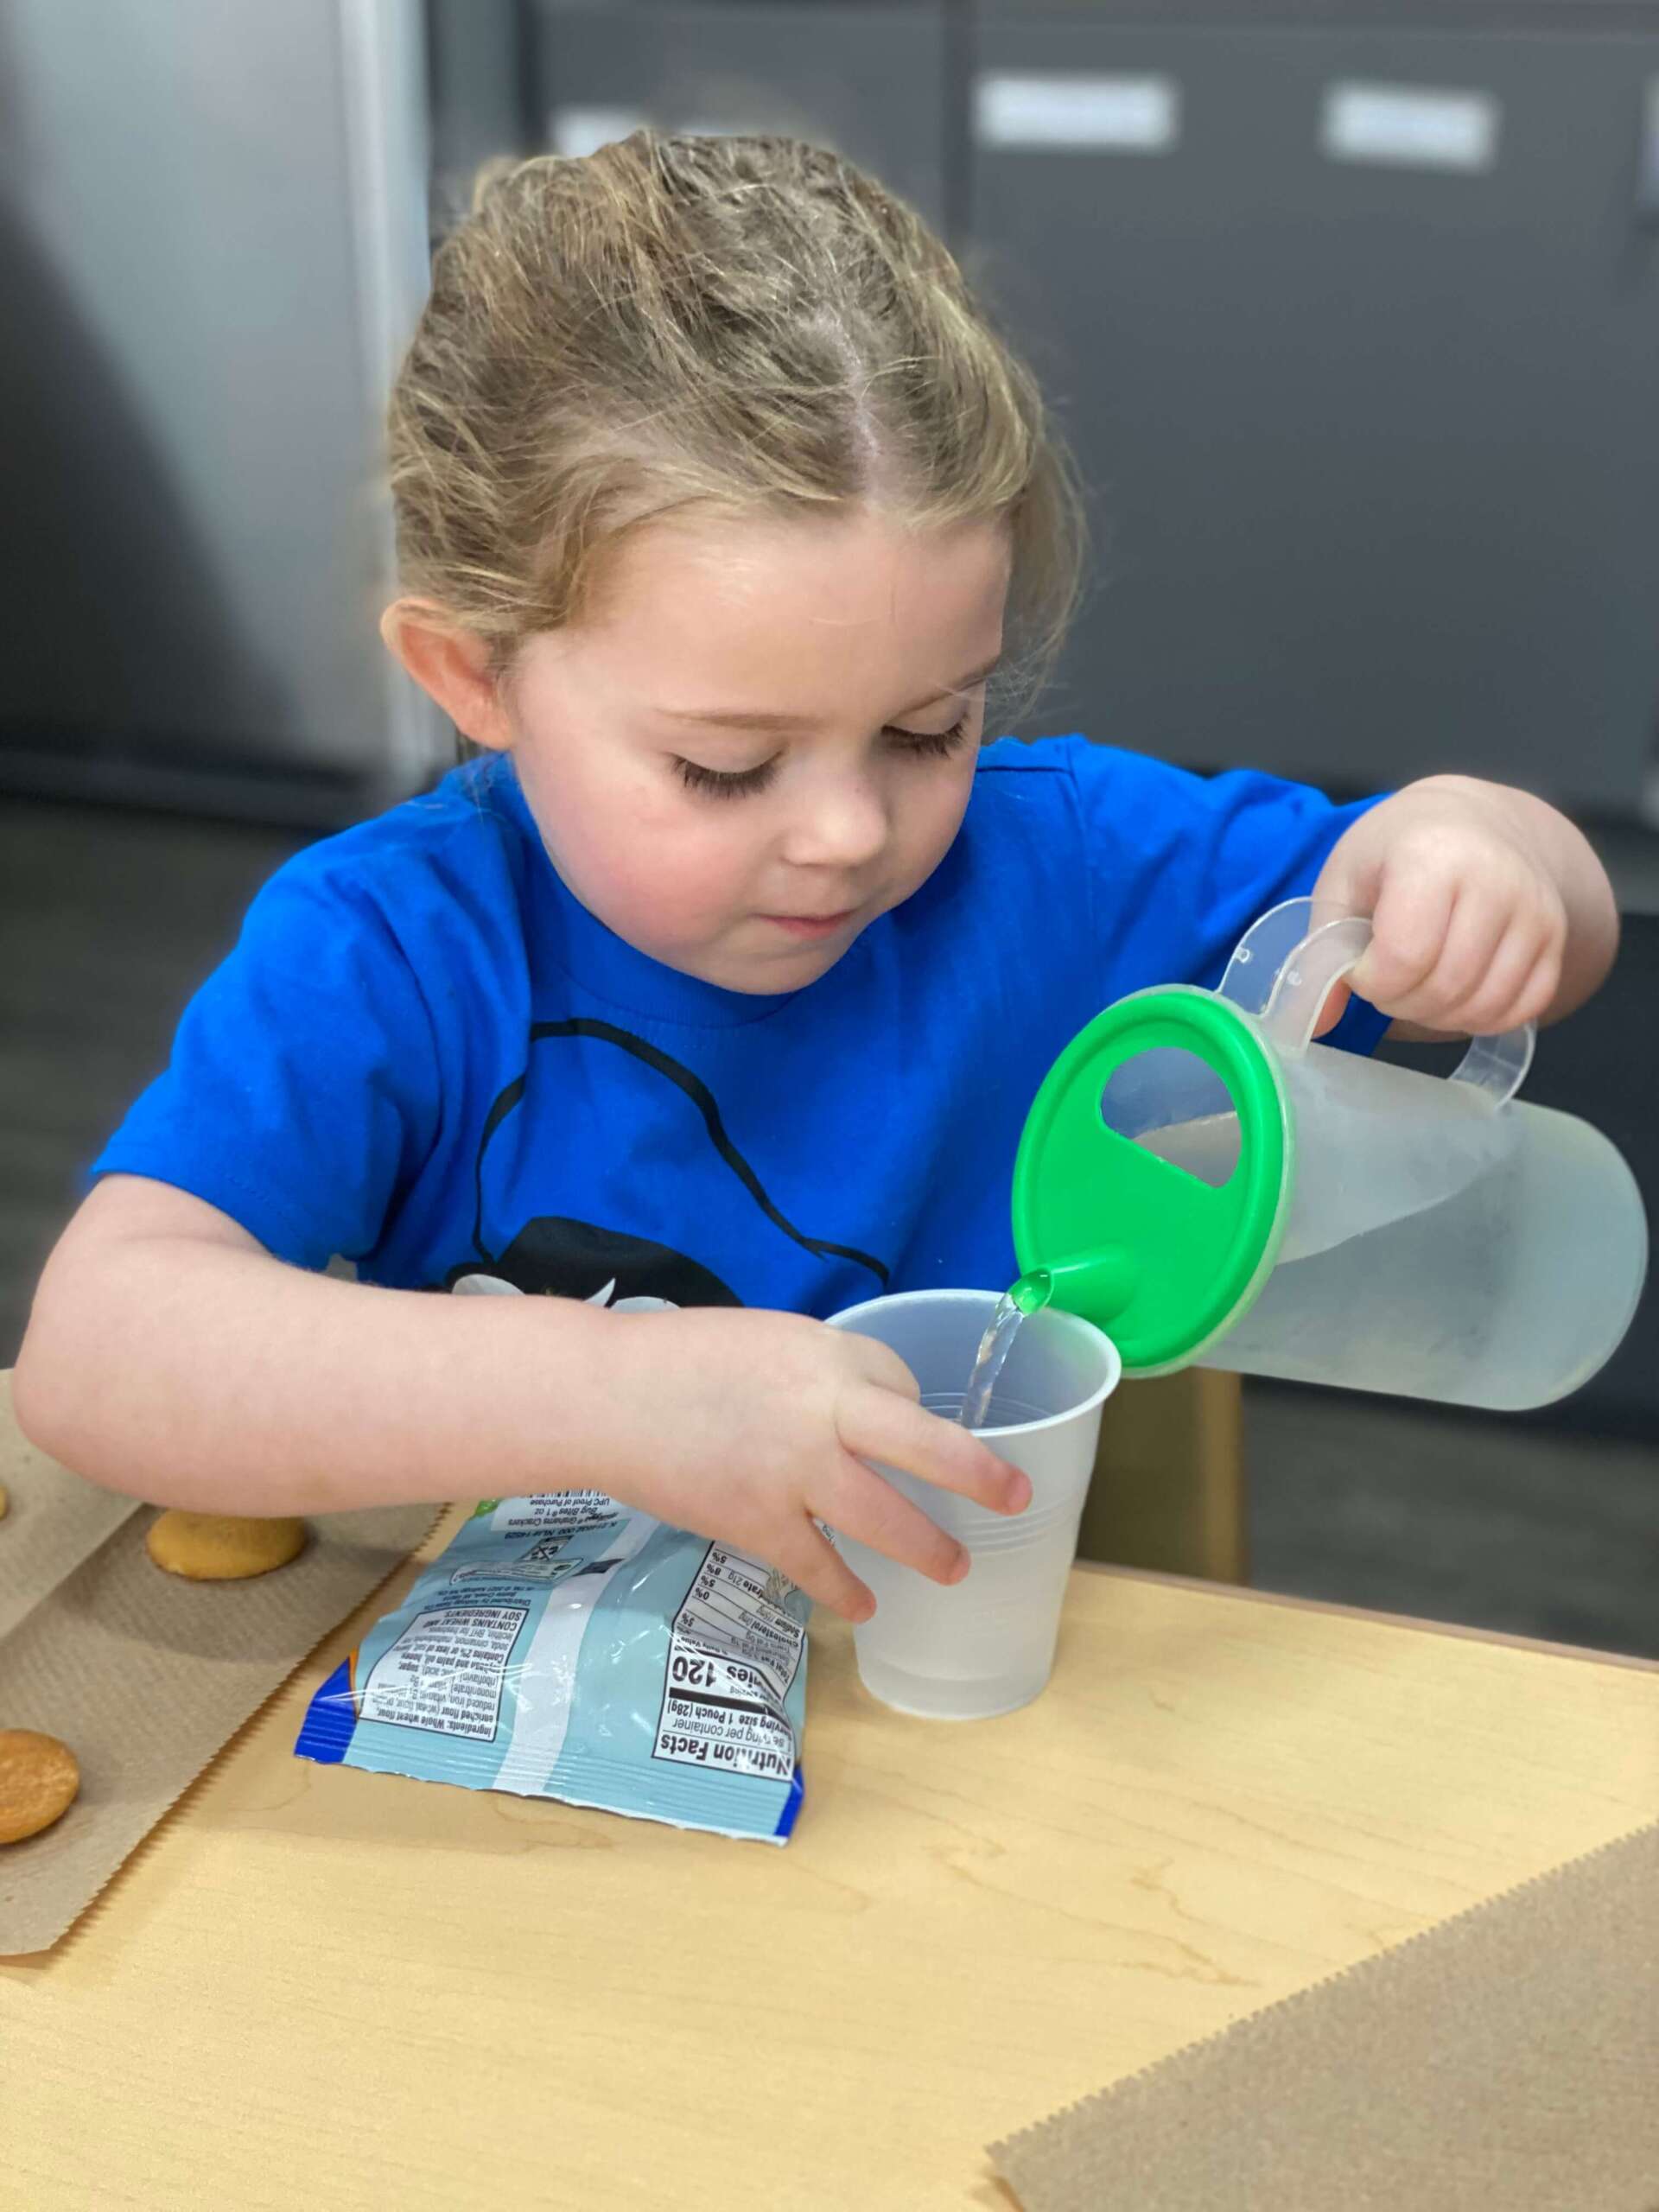 Child pouring water into a glass at snack time